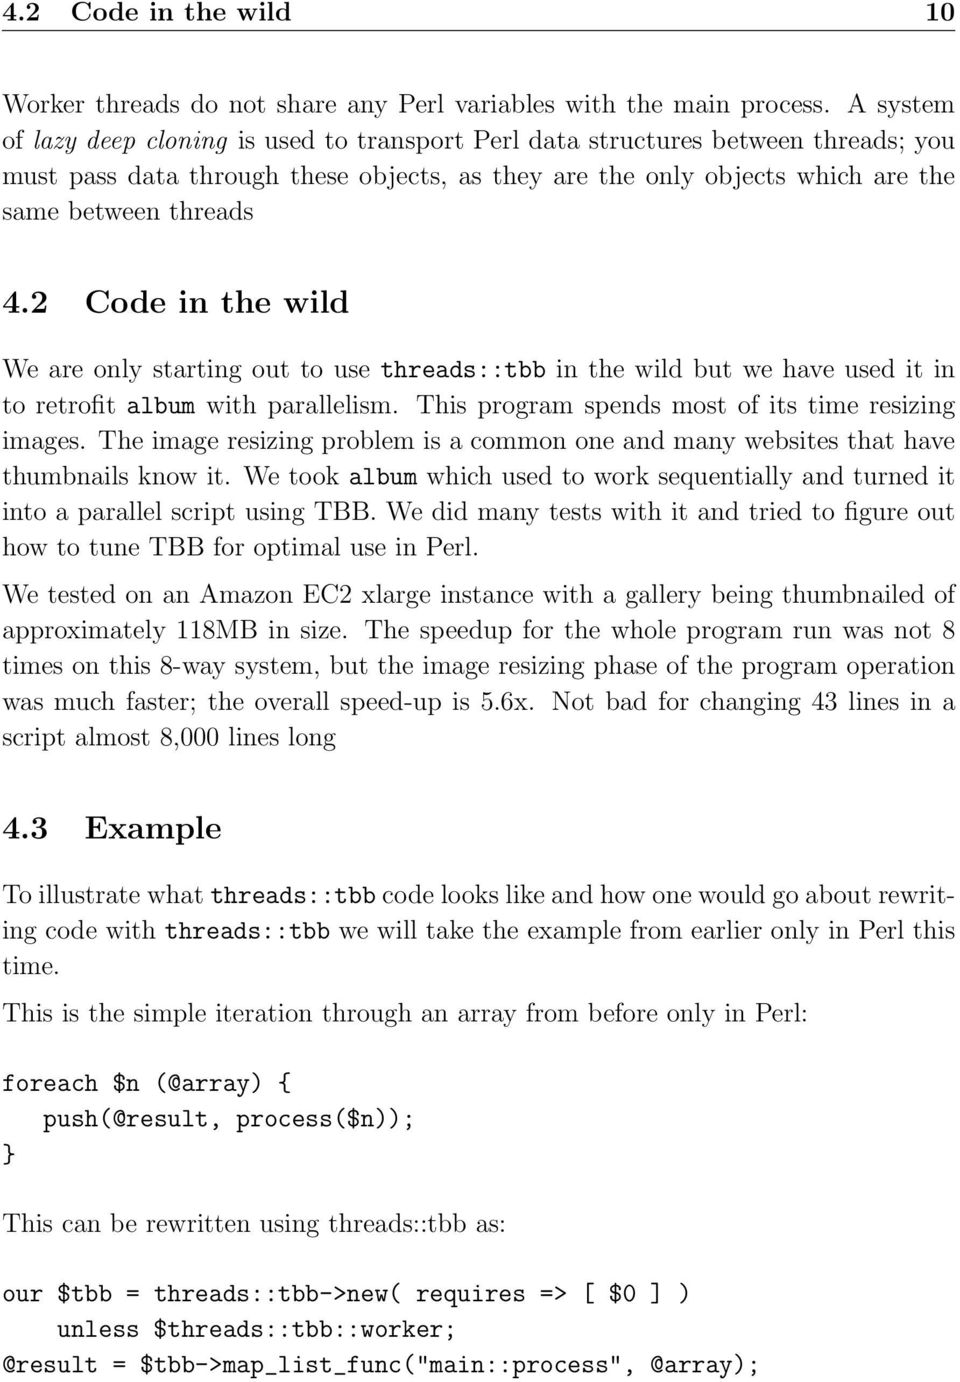 2 Code in the wild We are only starting out to use threads::tbb in the wild but we have used it in to retrofit album with parallelism. This program spends most of its time resizing images.